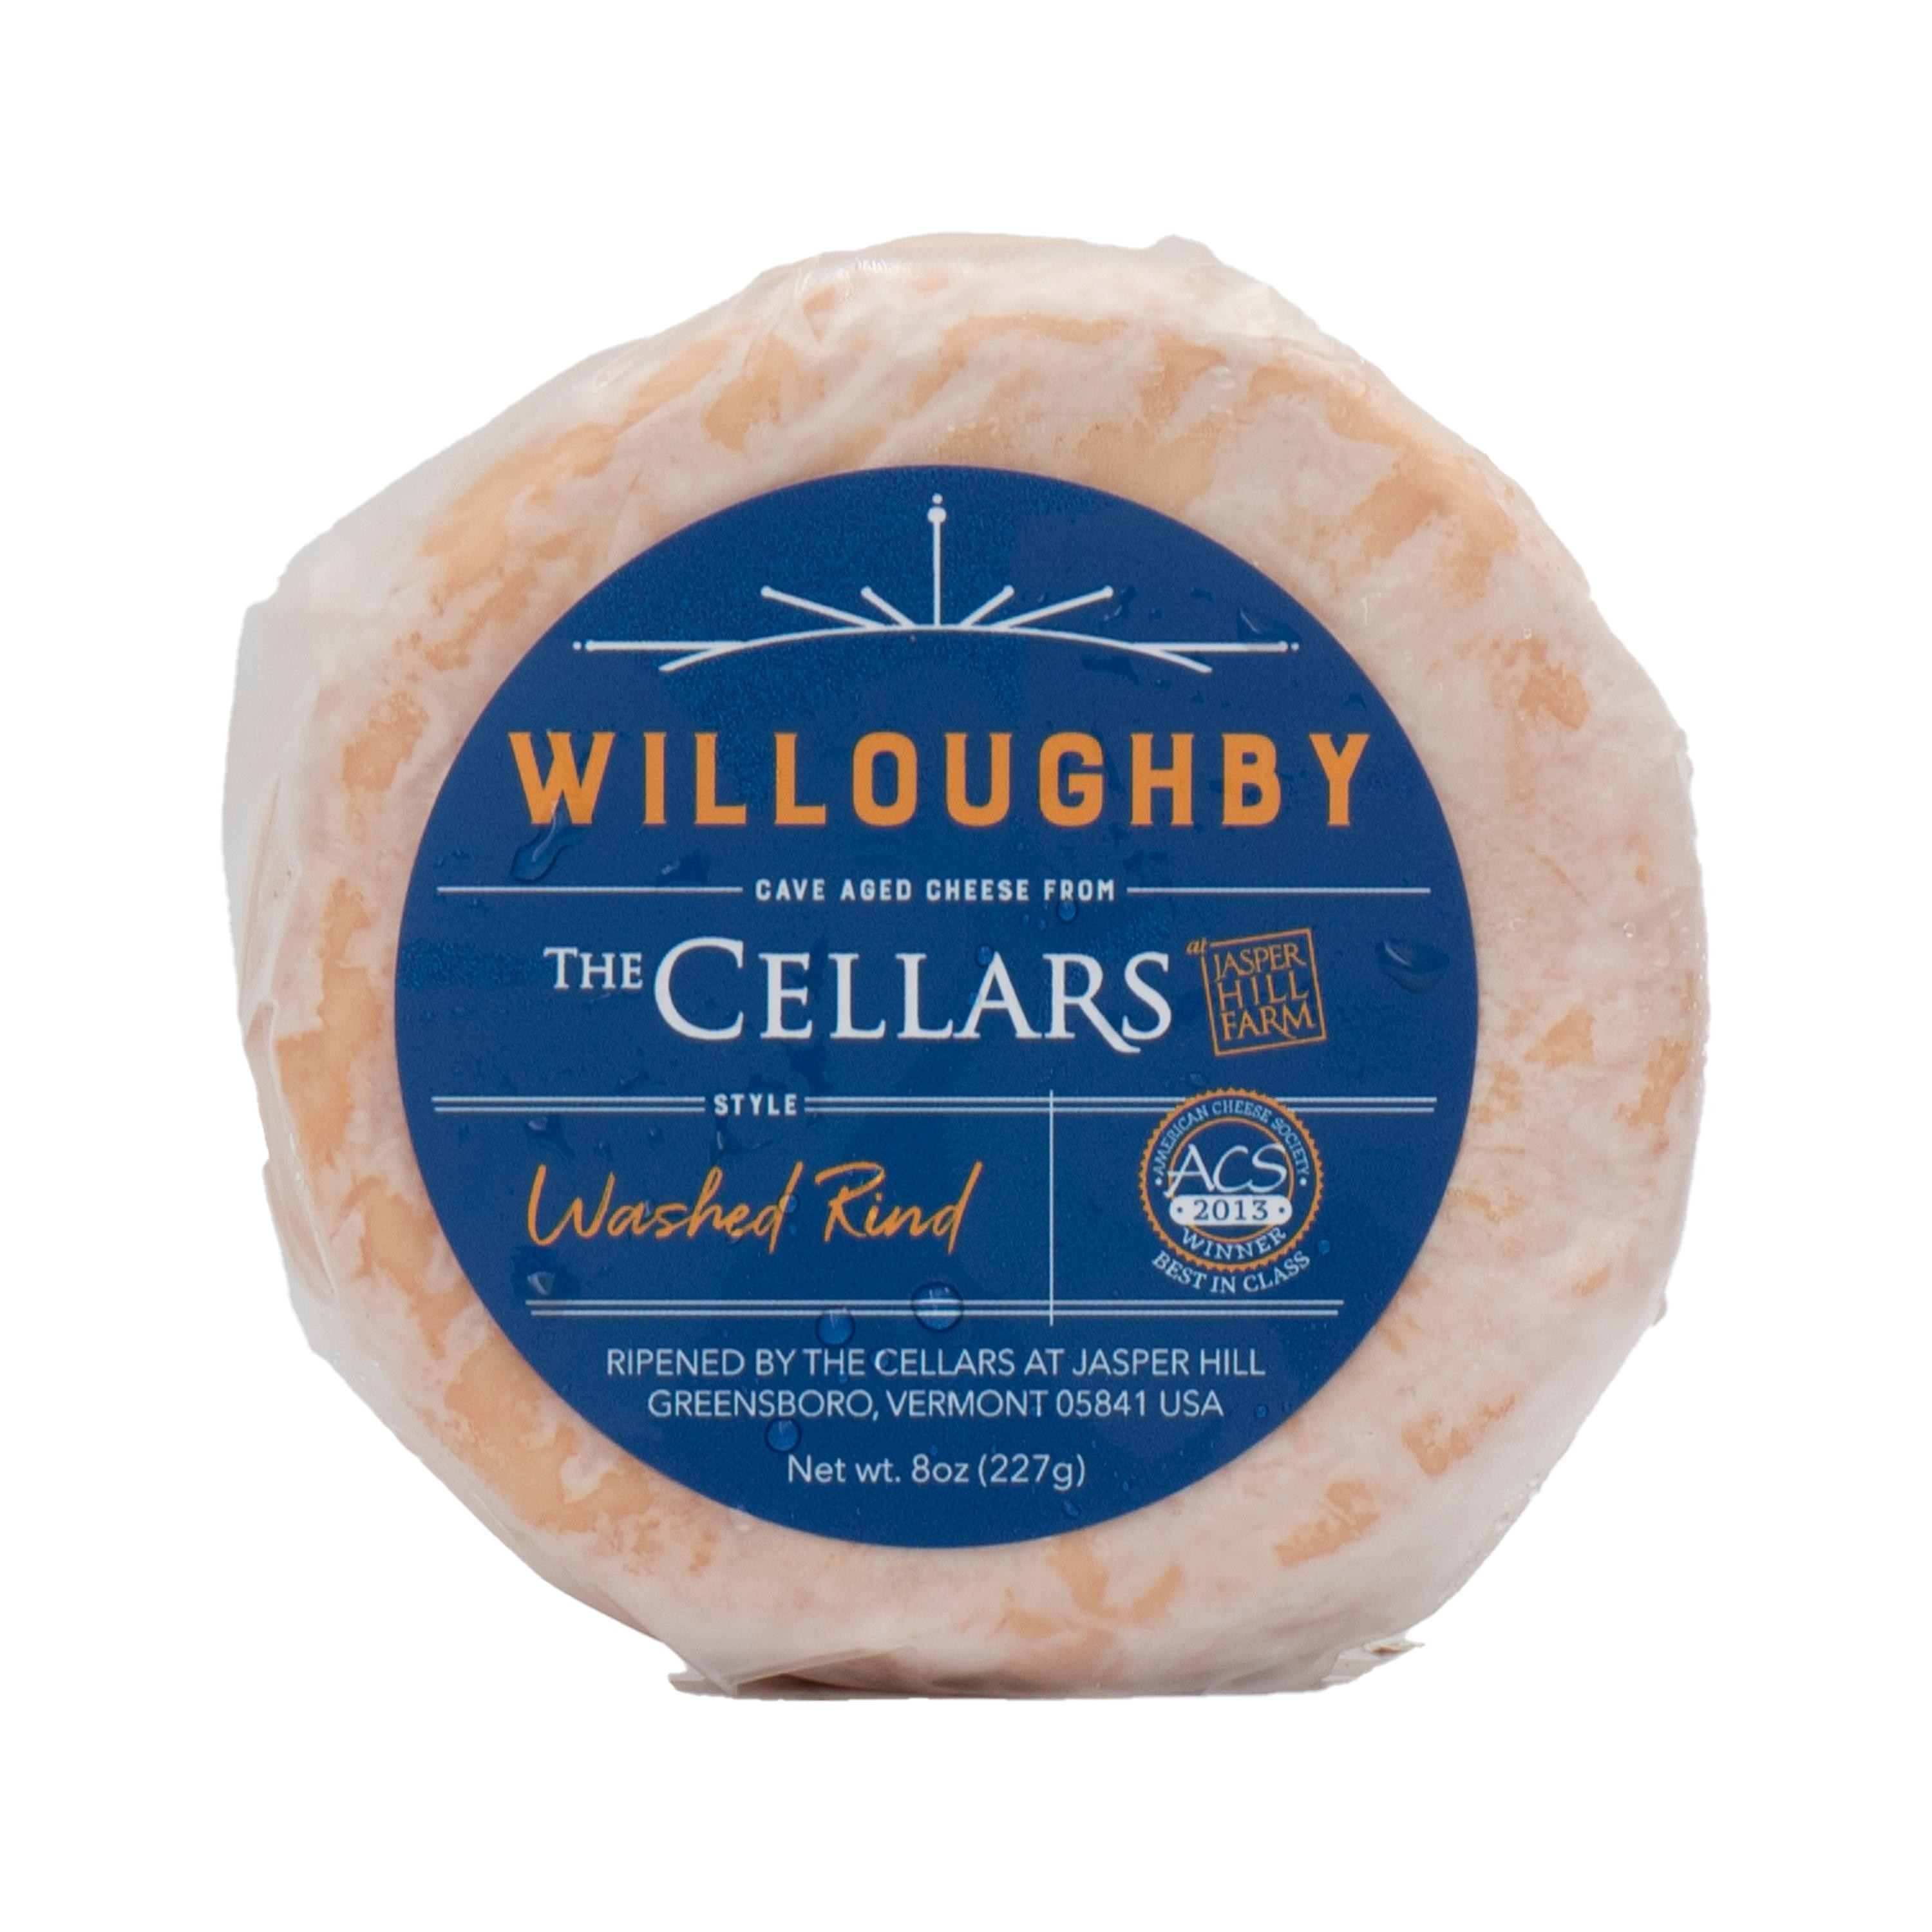 Willoughby Washed Rind Cheese